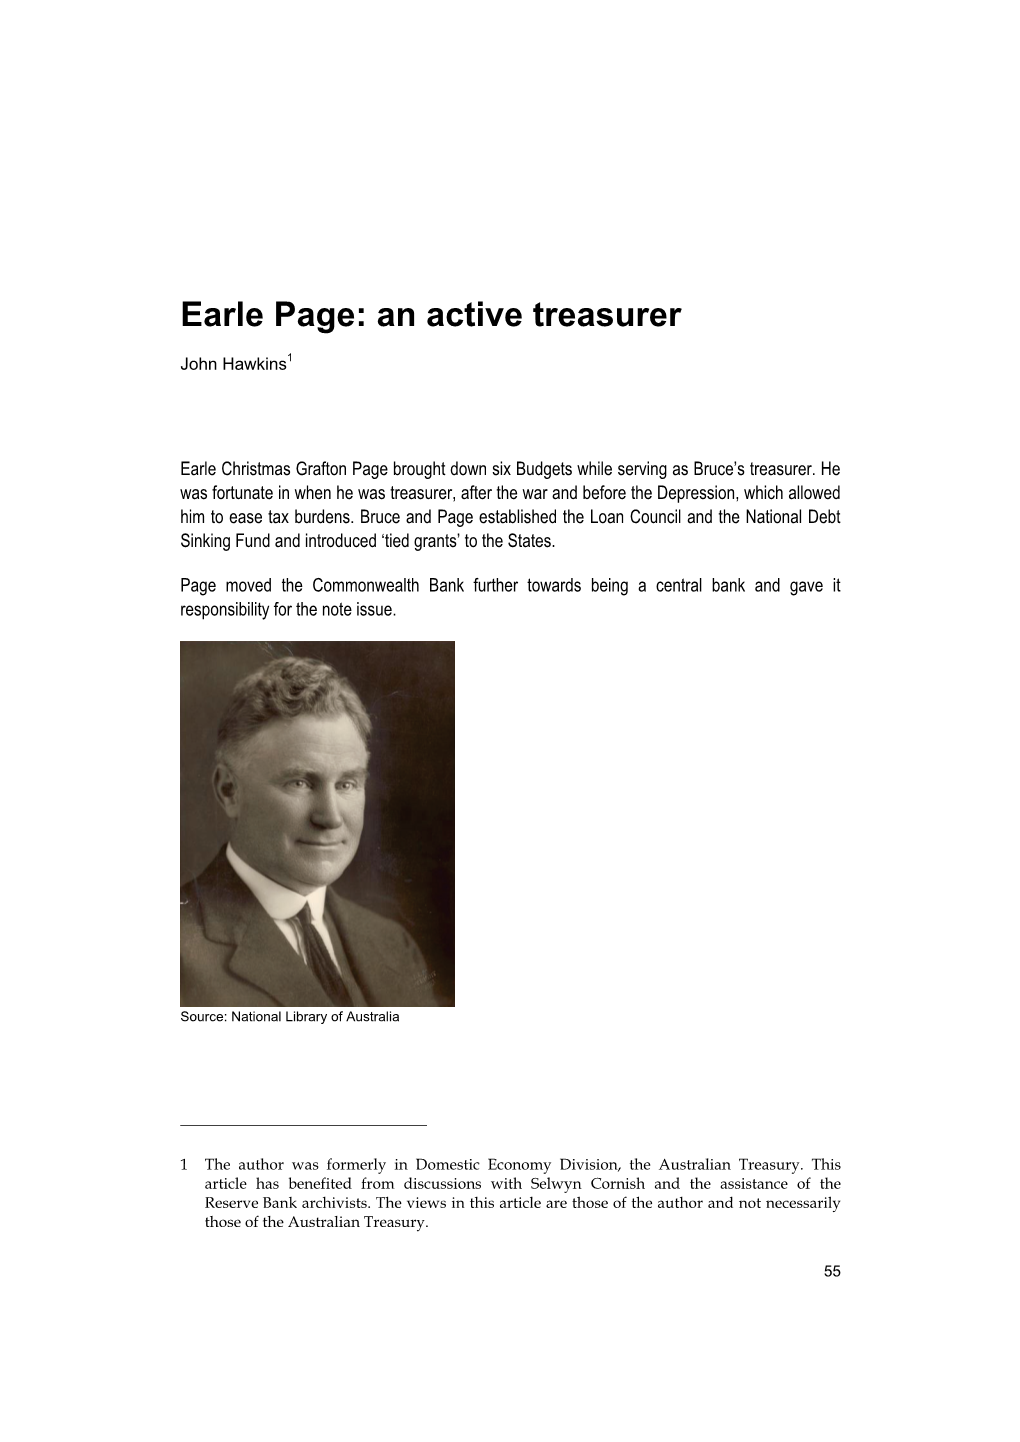 Earle Page: an Active Treasurer